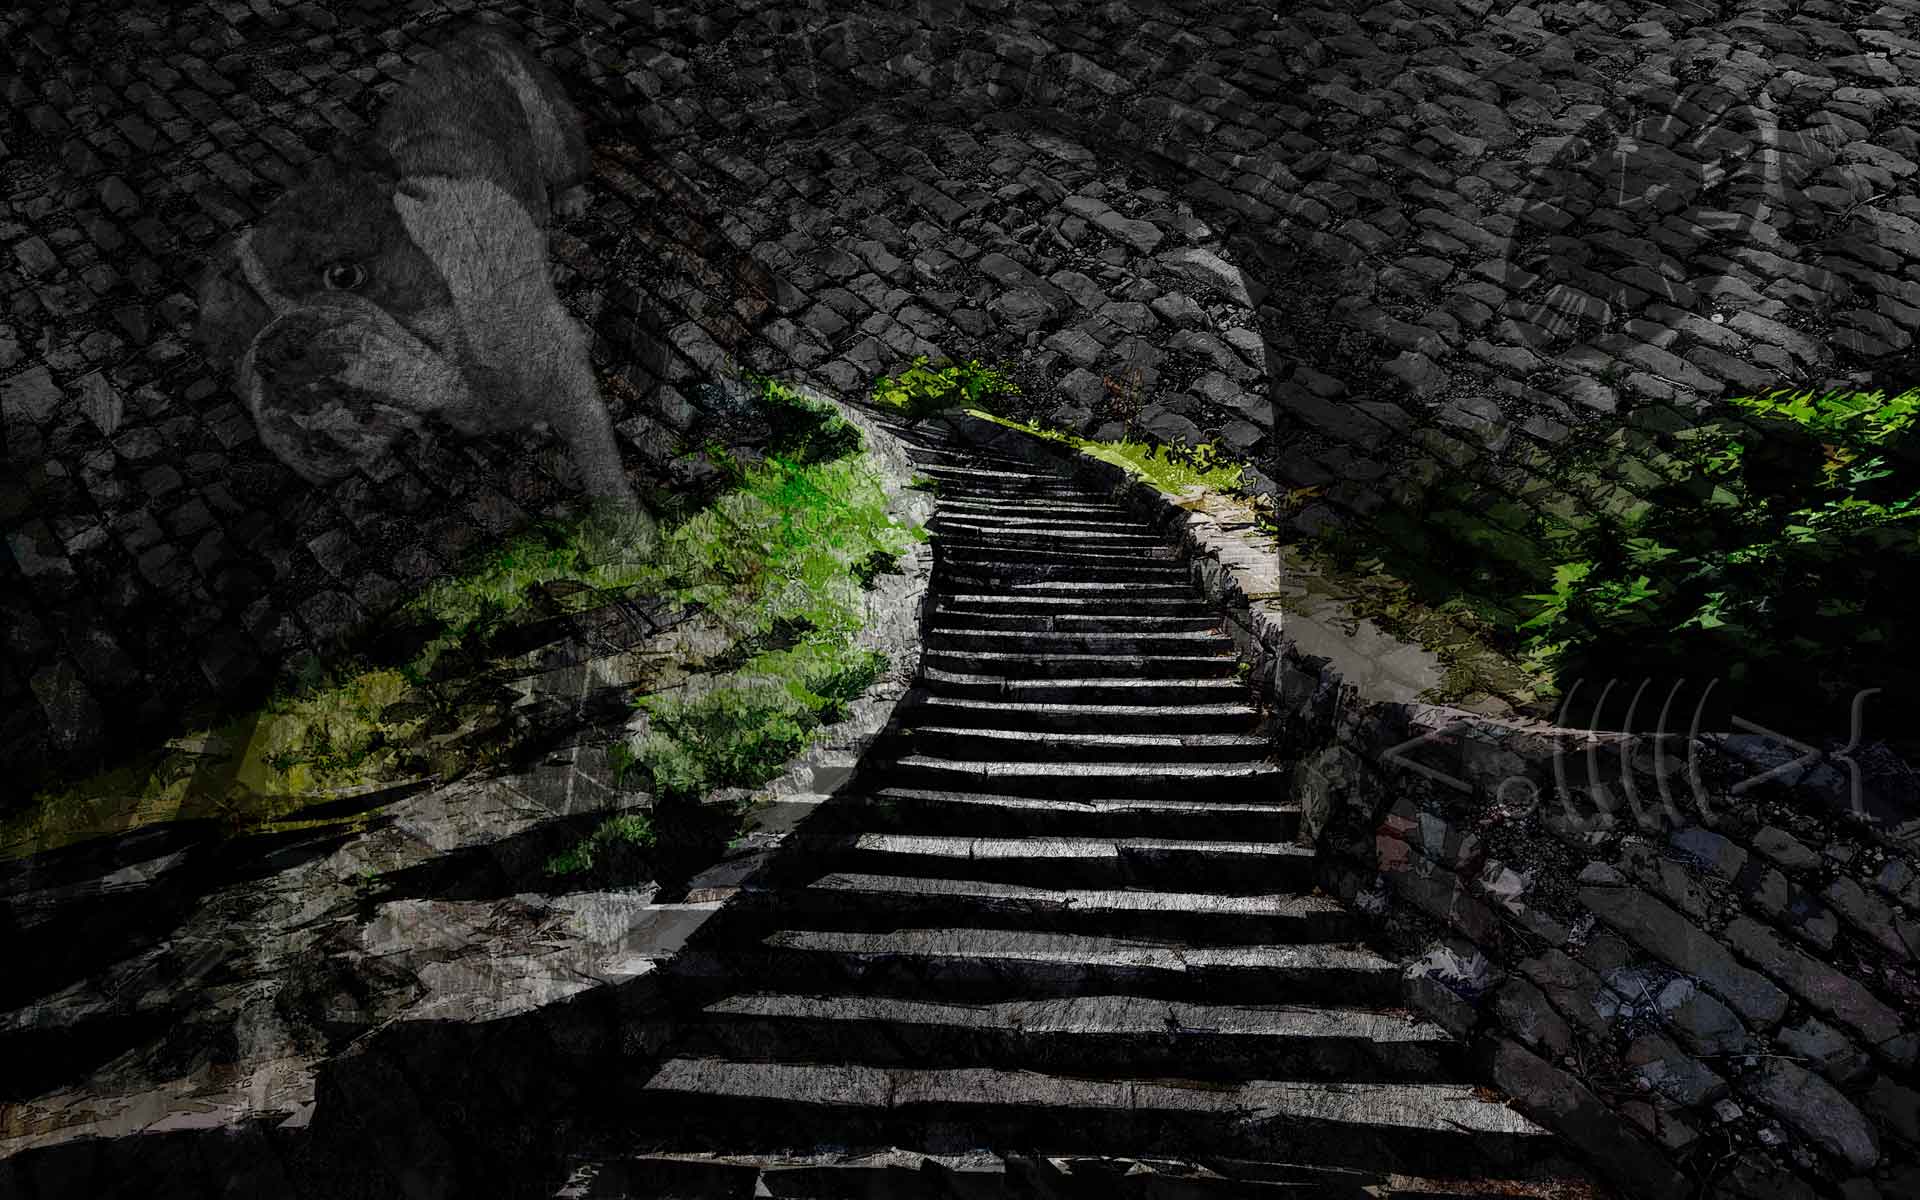 V.62: HD Image of Stairs, Ultra HD 4K Stairs Wallpaper